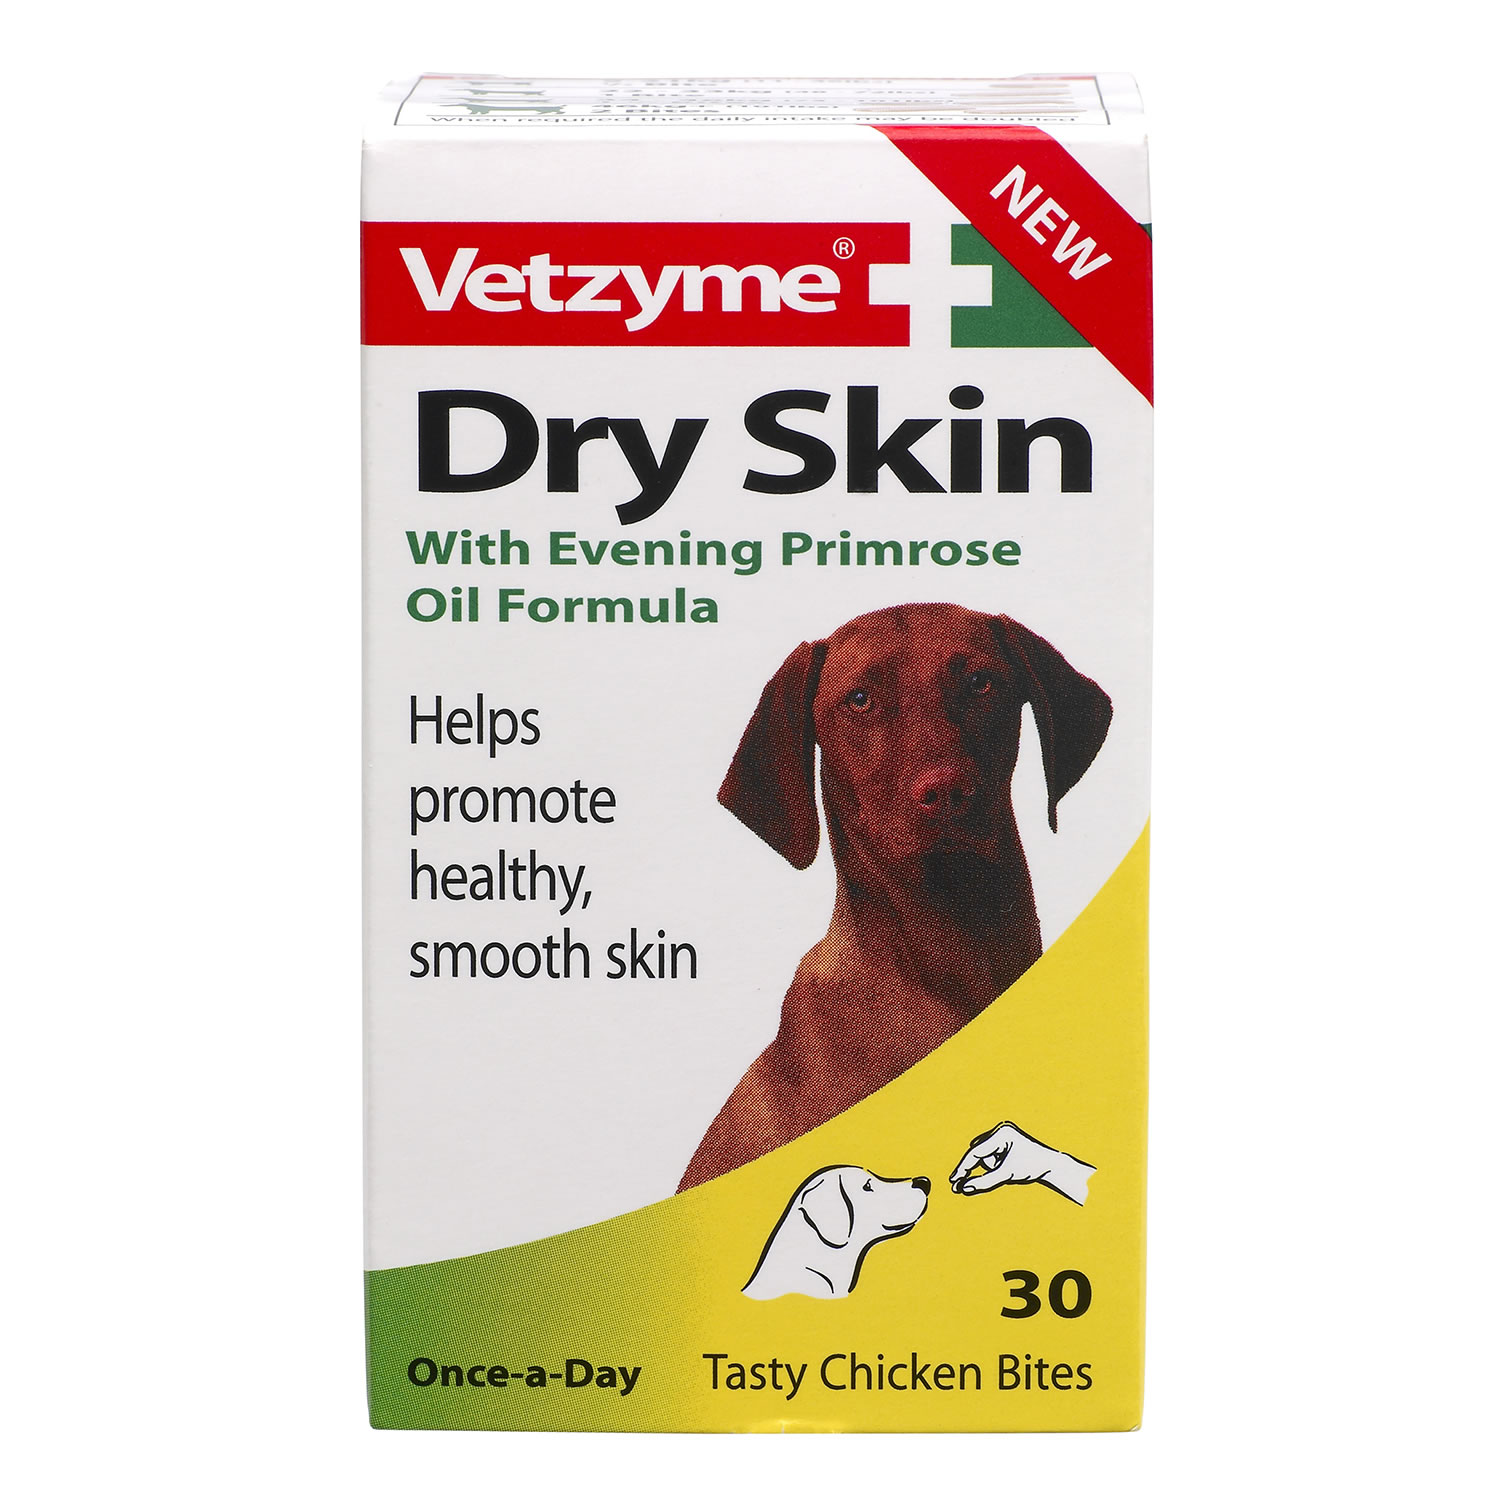 VETZYME DRY SKIN TABLETS VETZYME DRY SKIN TABLETS 30 PACK  30 PACK